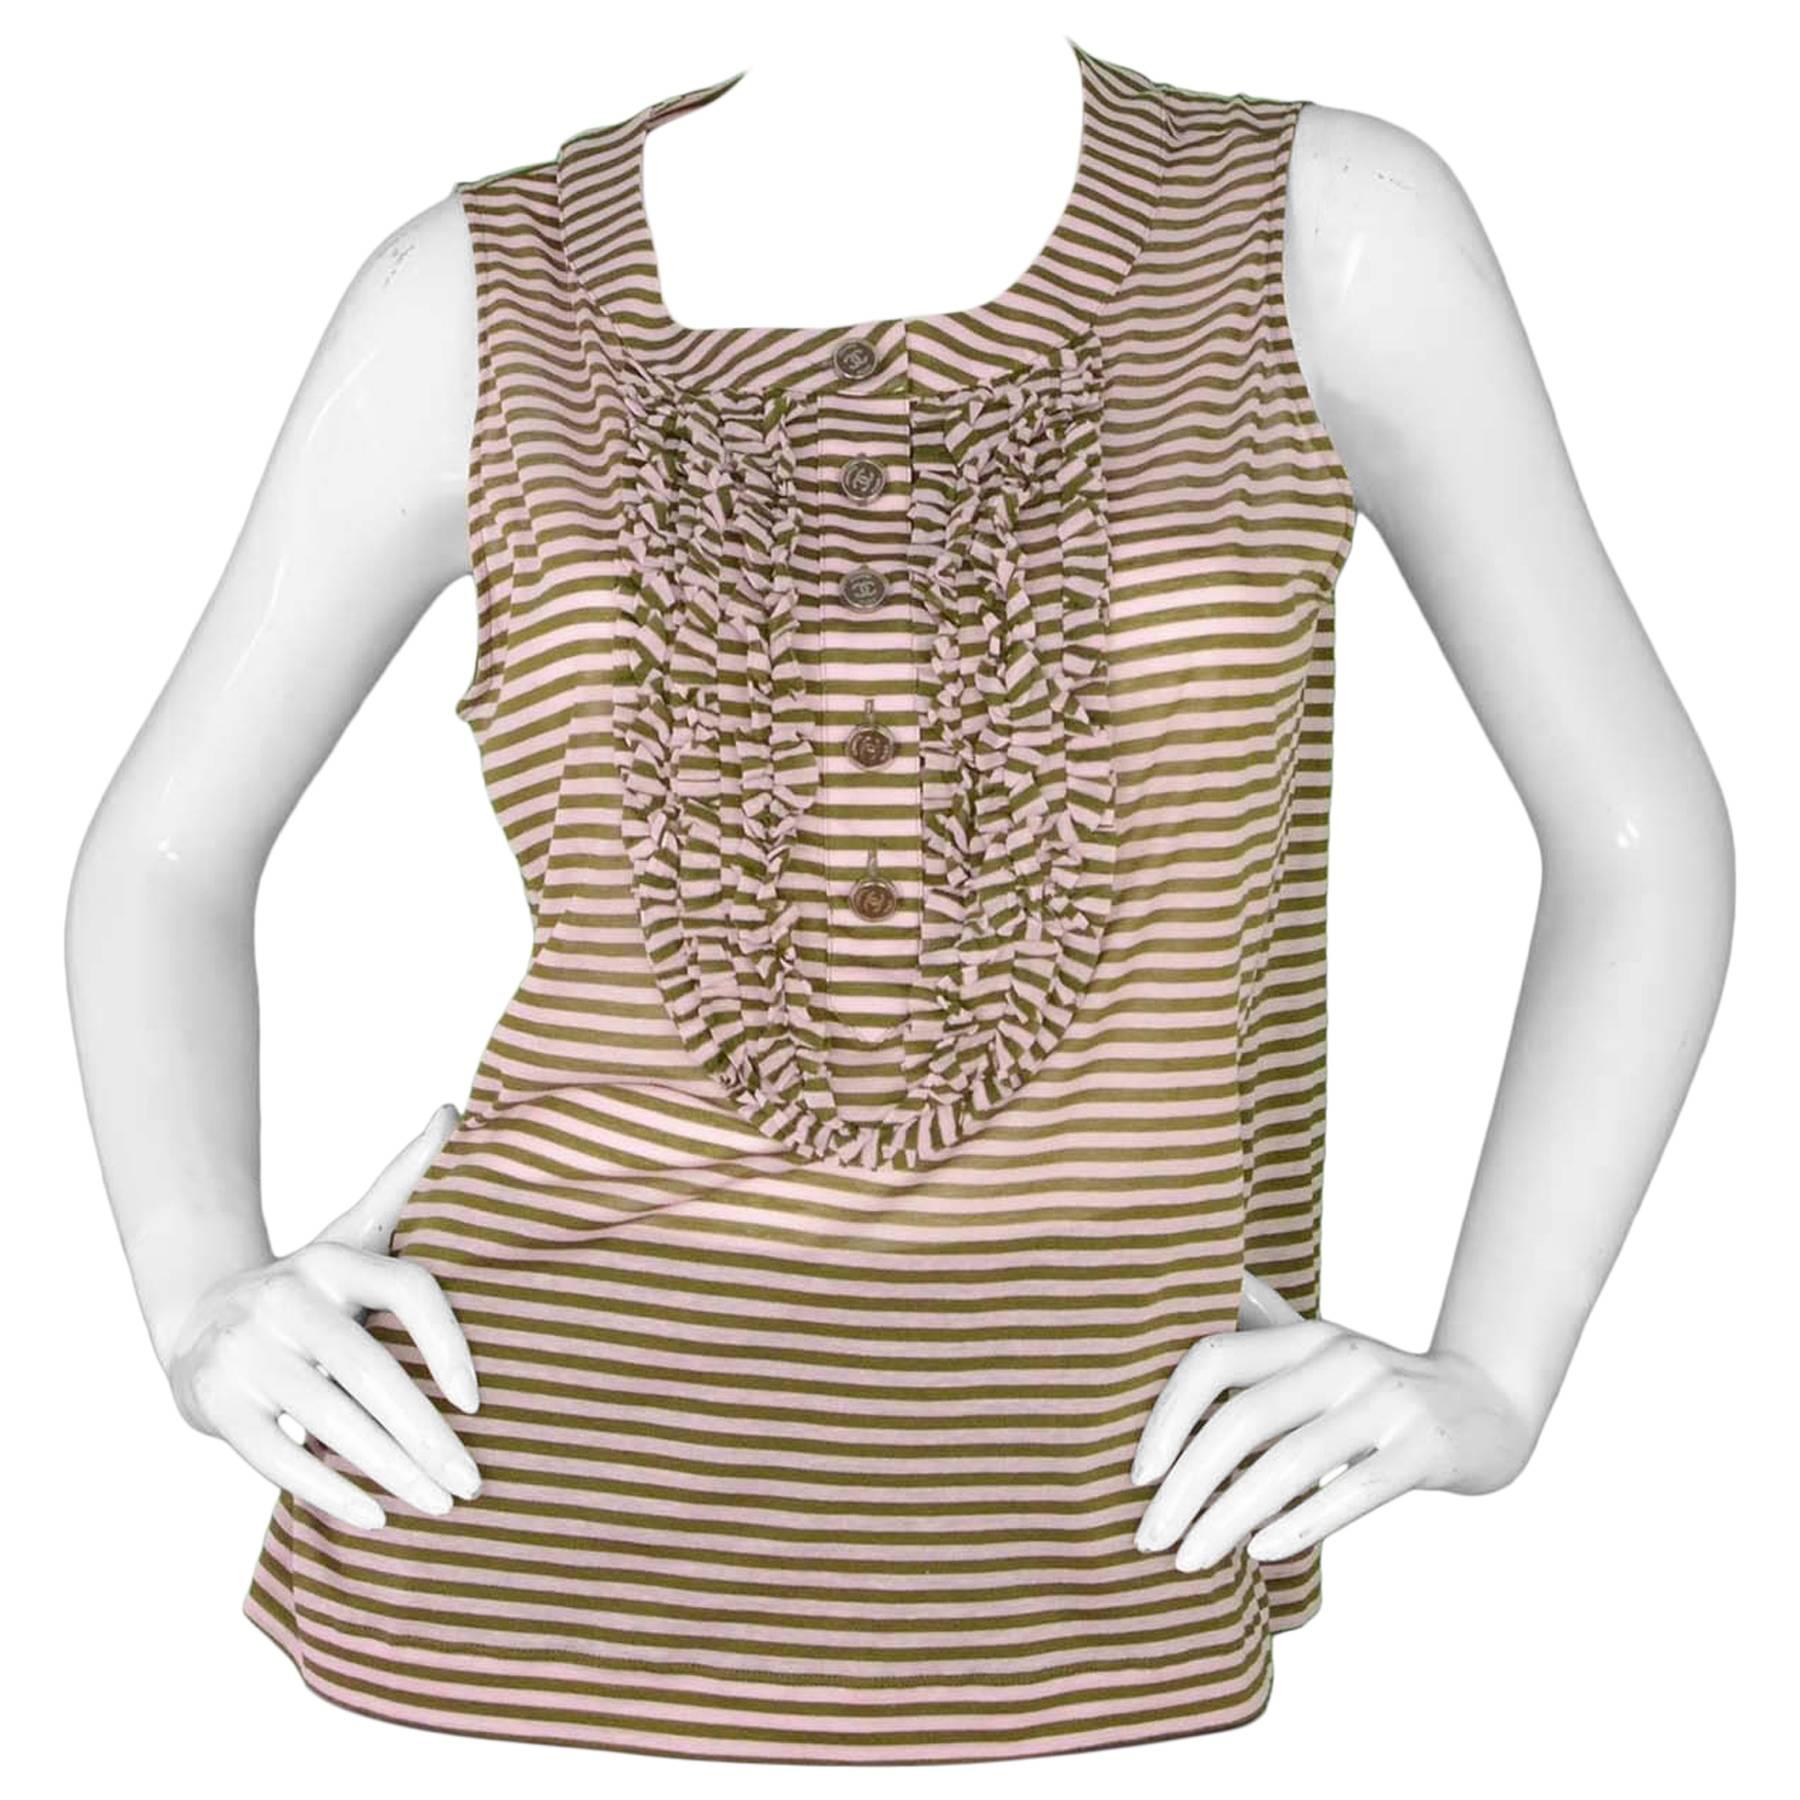 Chanel Pink and Green Sleeveless Striped Top with Ruffles sz 48 rt. $1, 380